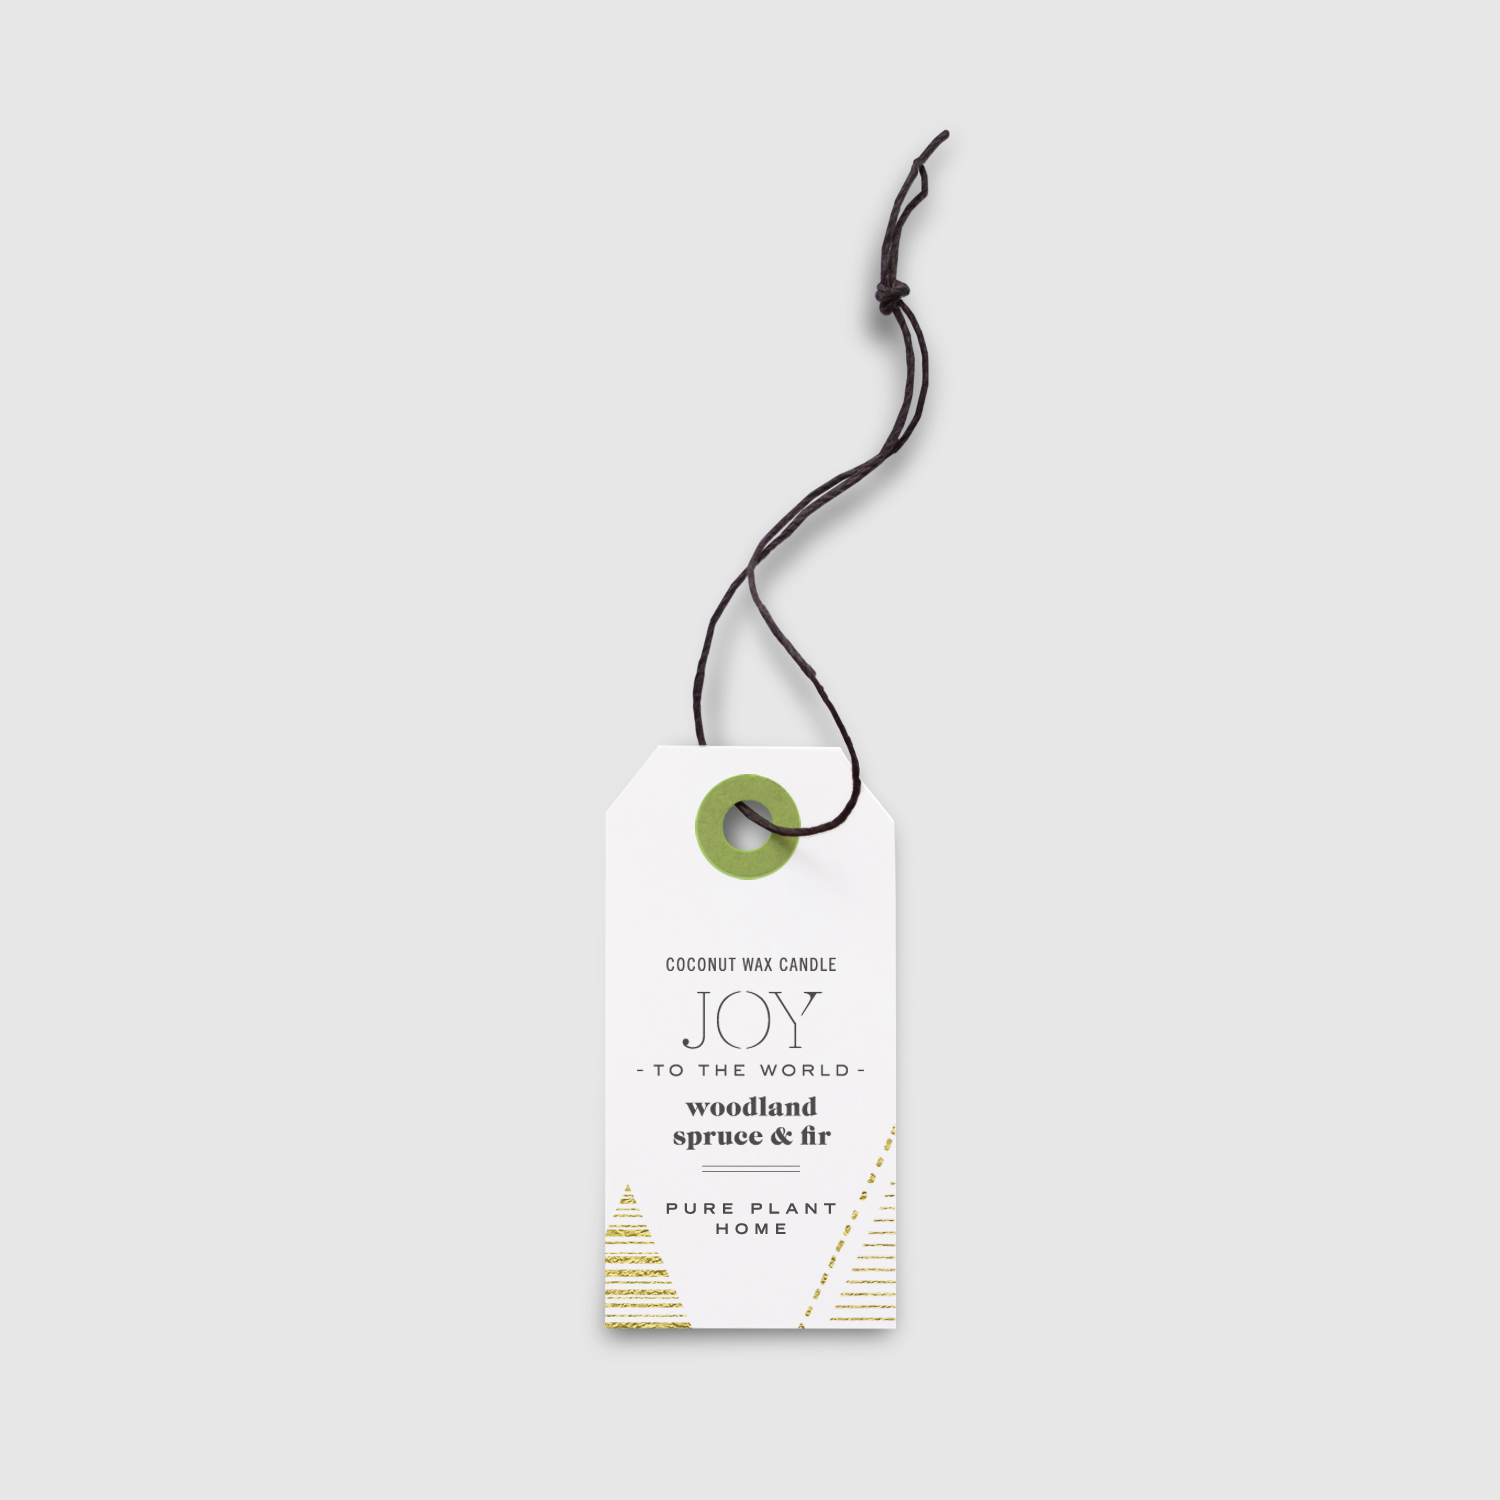 Peggy Wong Studio / hangtag design for Pure Plant Home candle packaging